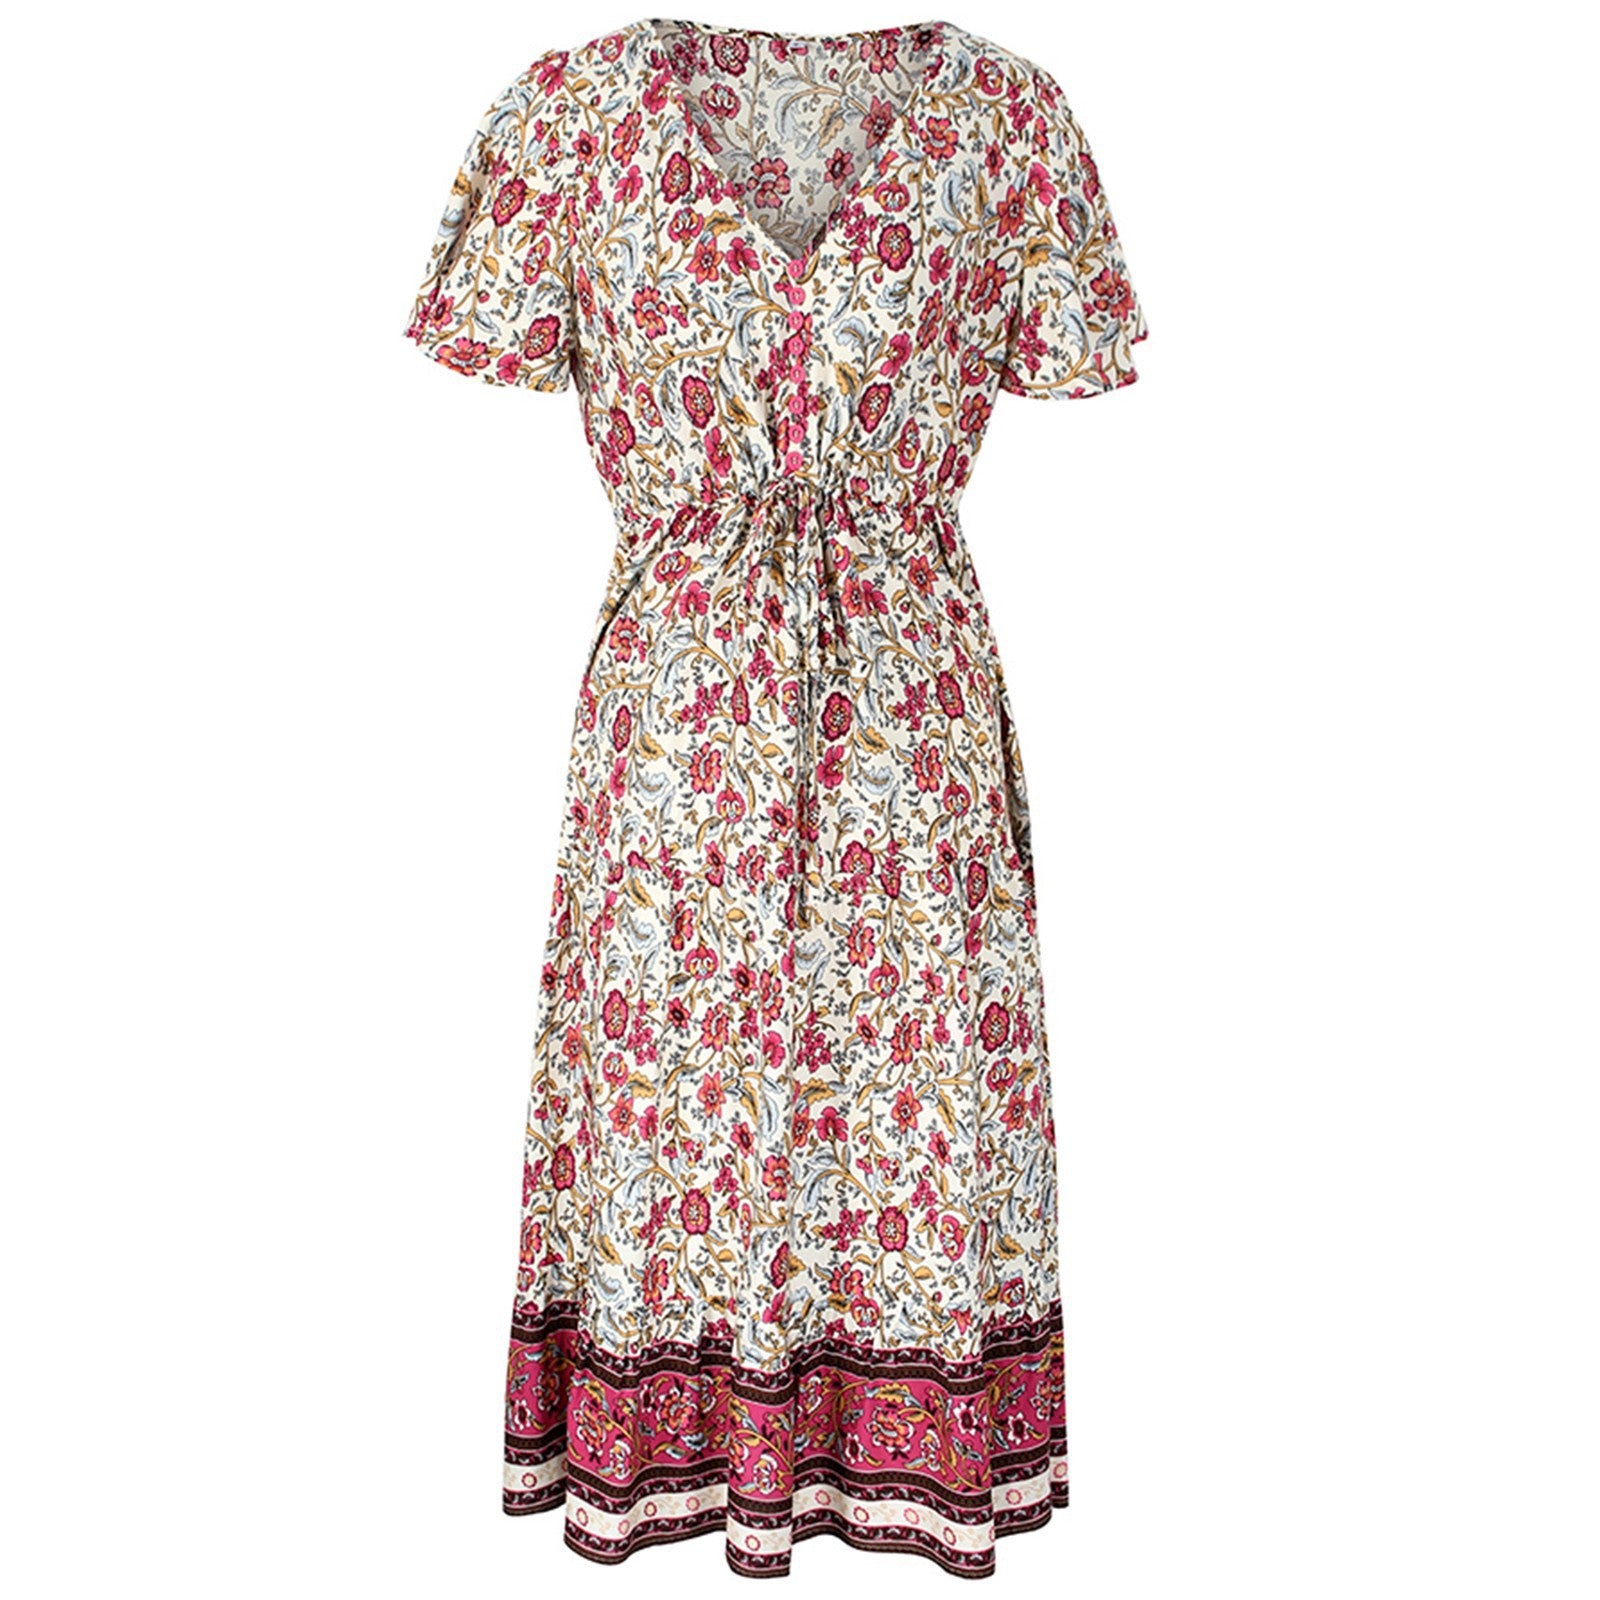 Women's Fit Small Floral Print Mid-length V-neck Dresses